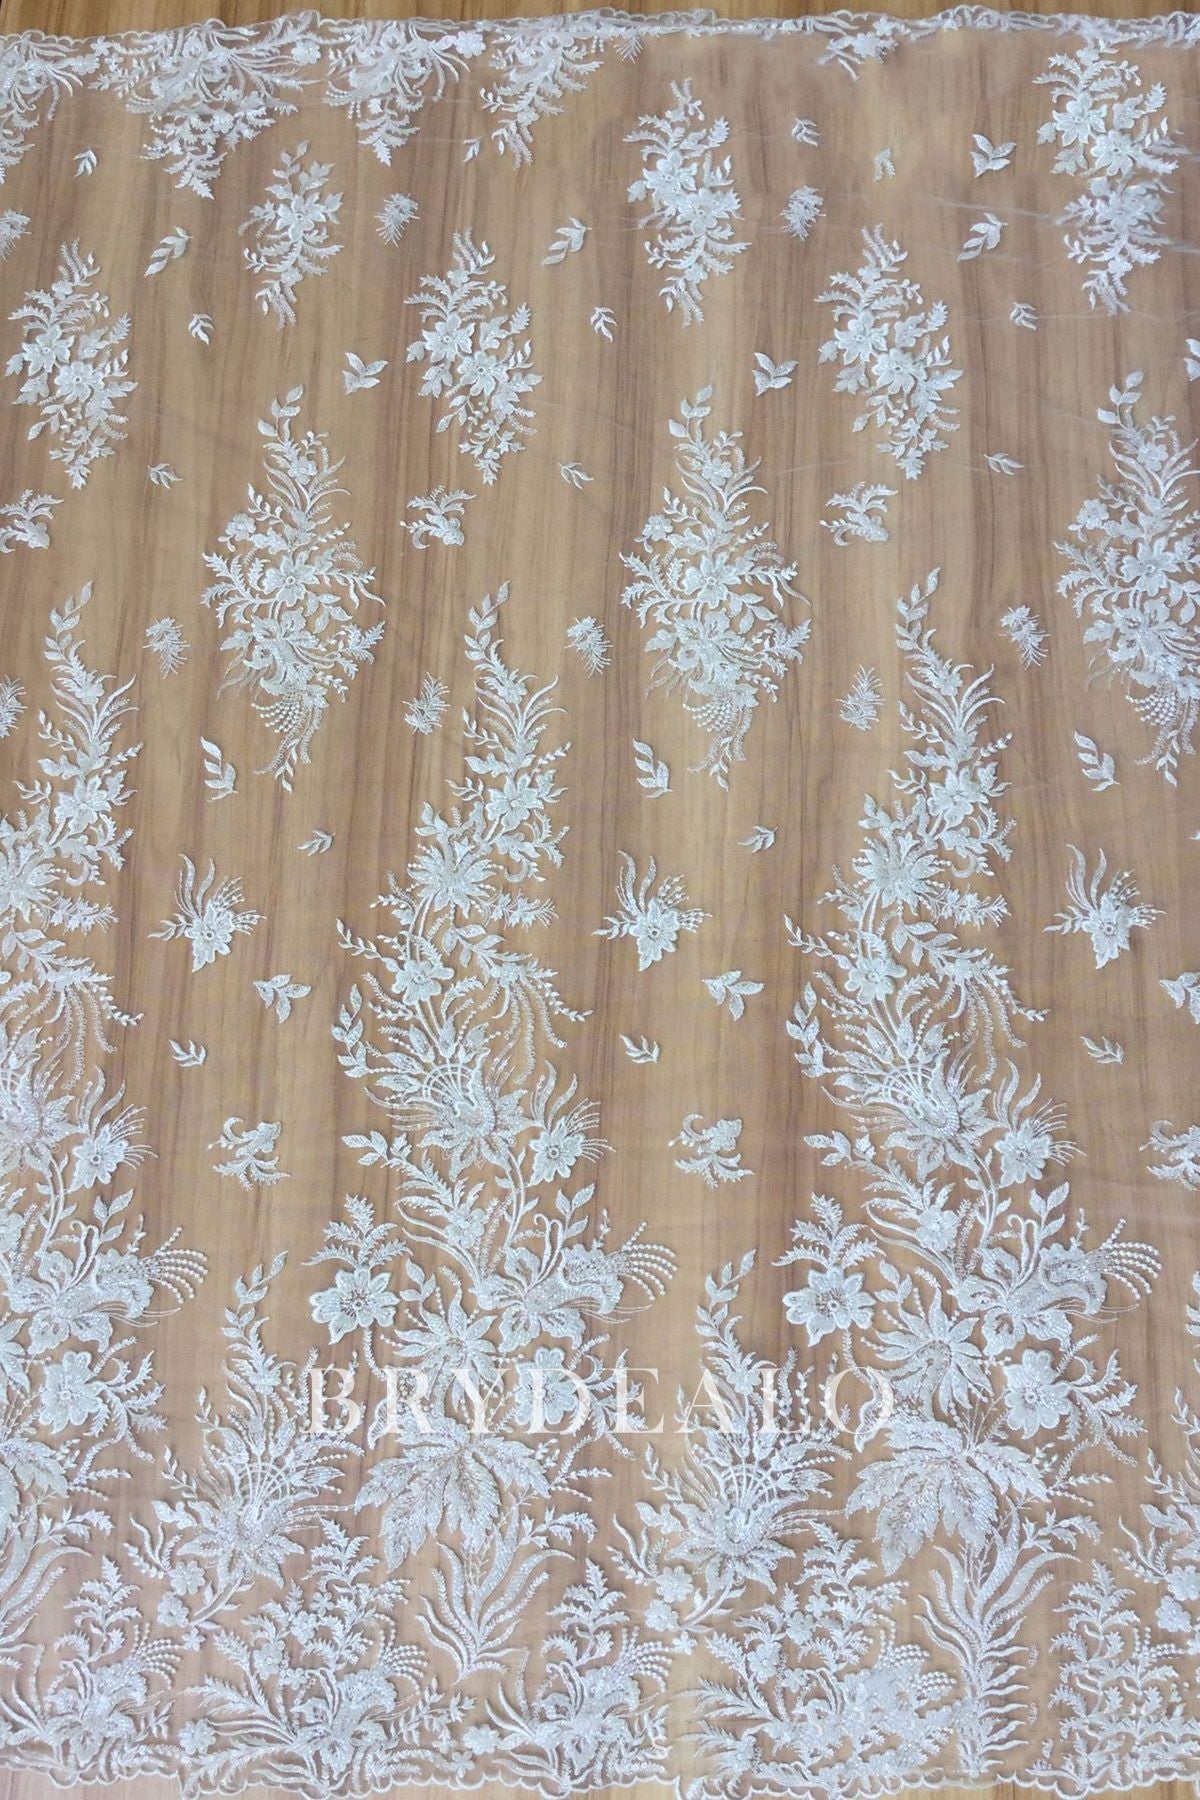 Luxury Shimmery Beaded Flower Apparel Lace Fabric